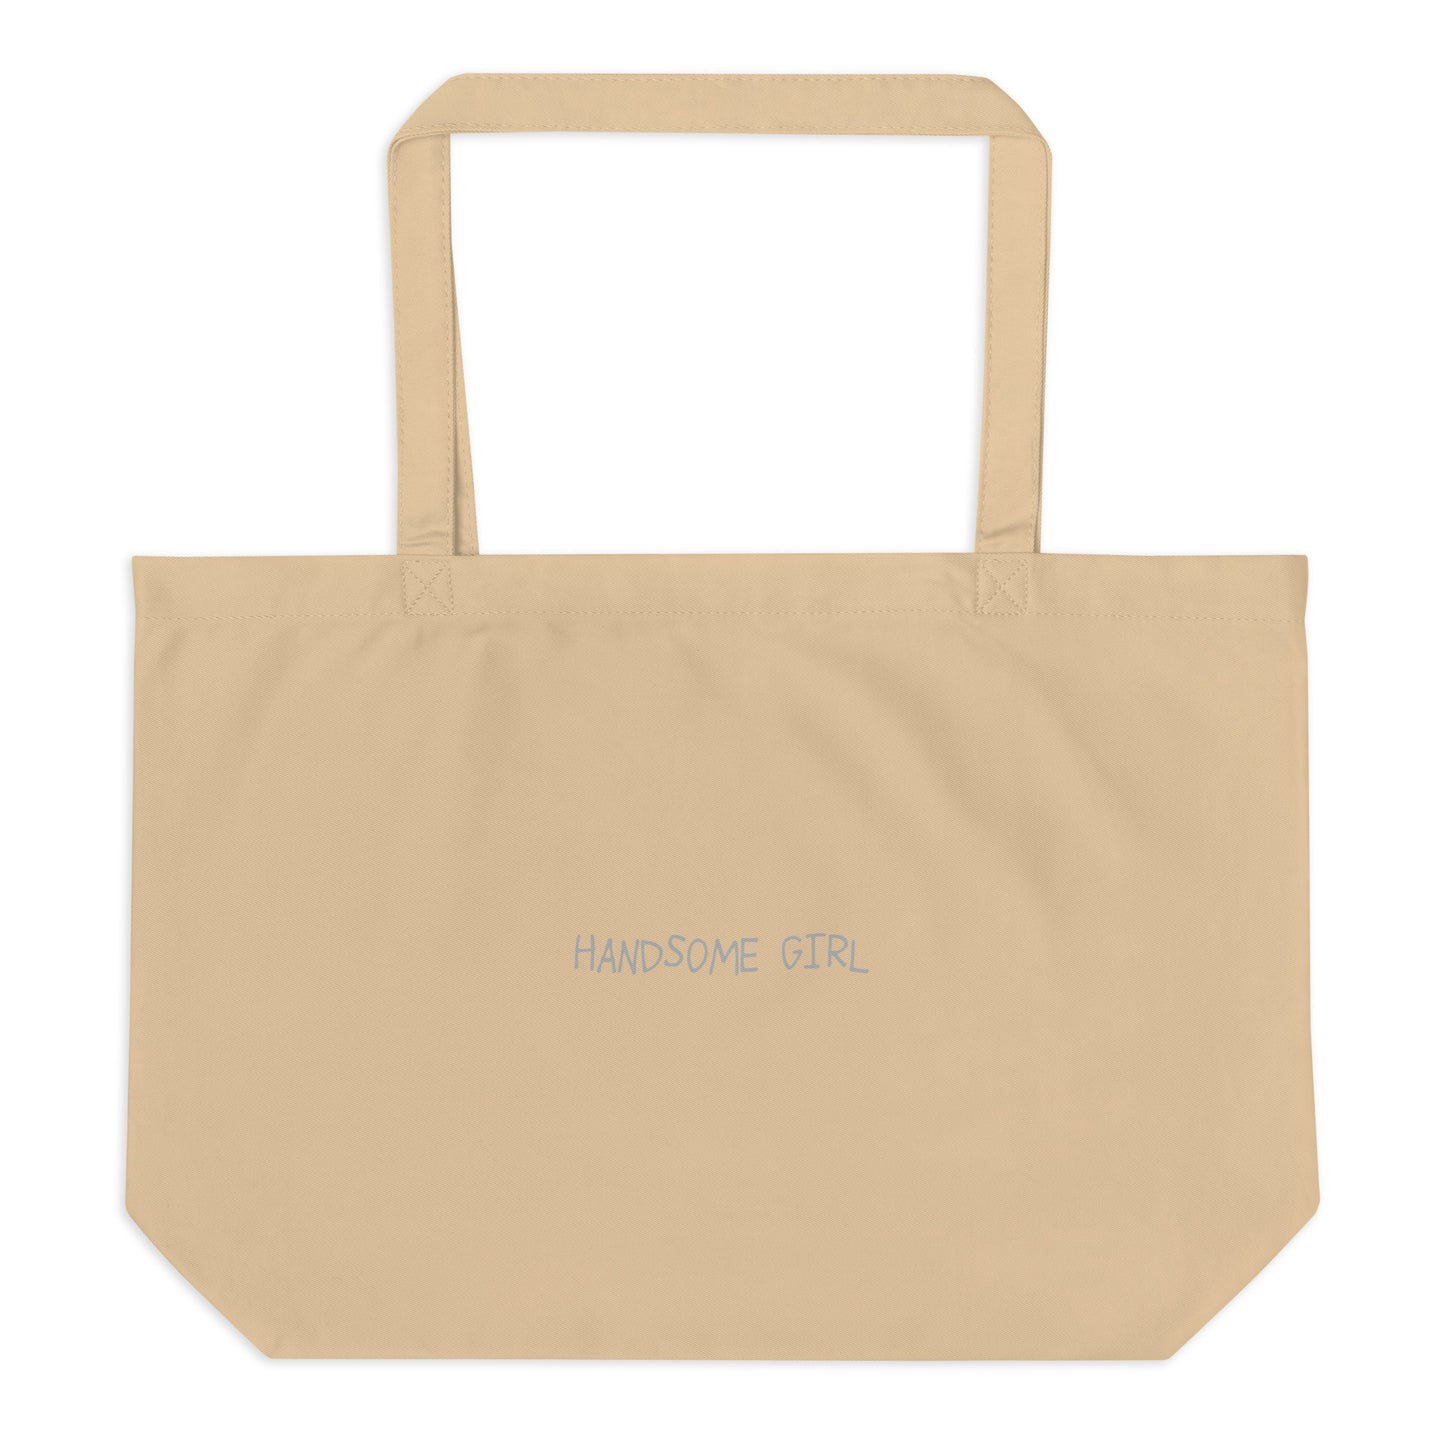 I Love You Large Tote